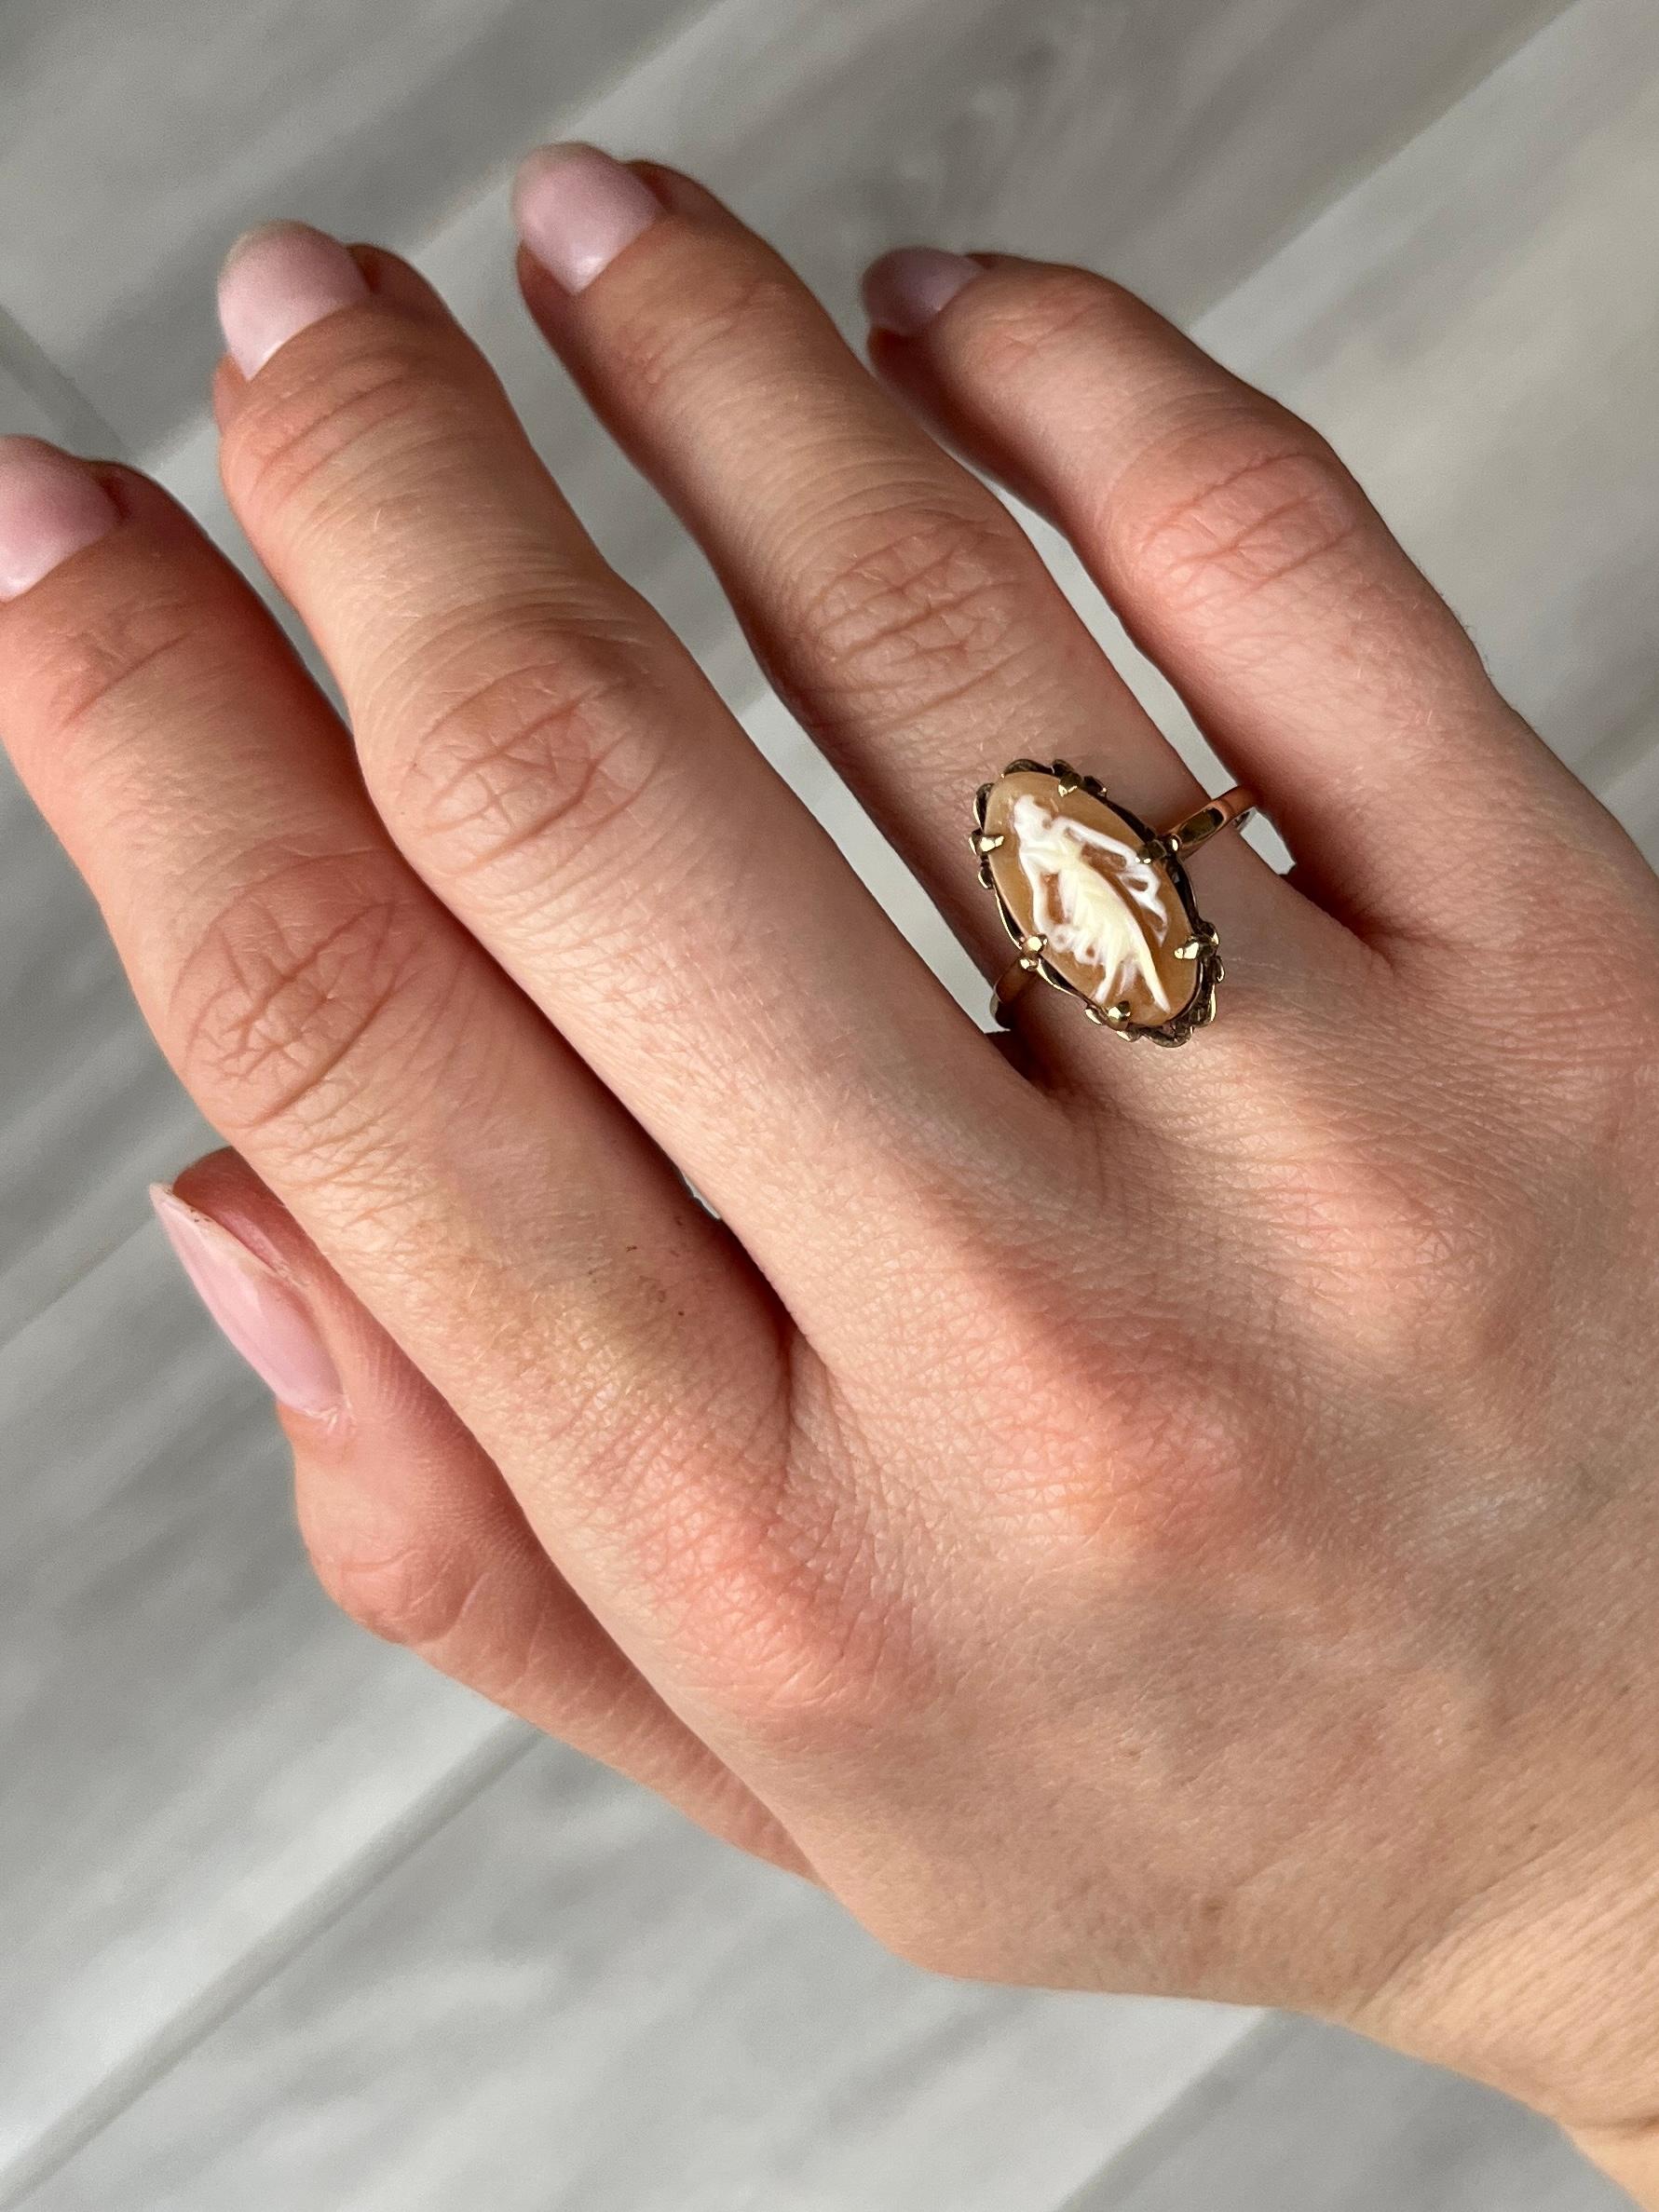 Vintage 9 Carat Gold Cameo Ring In Fair Condition For Sale In Chipping Campden, GB